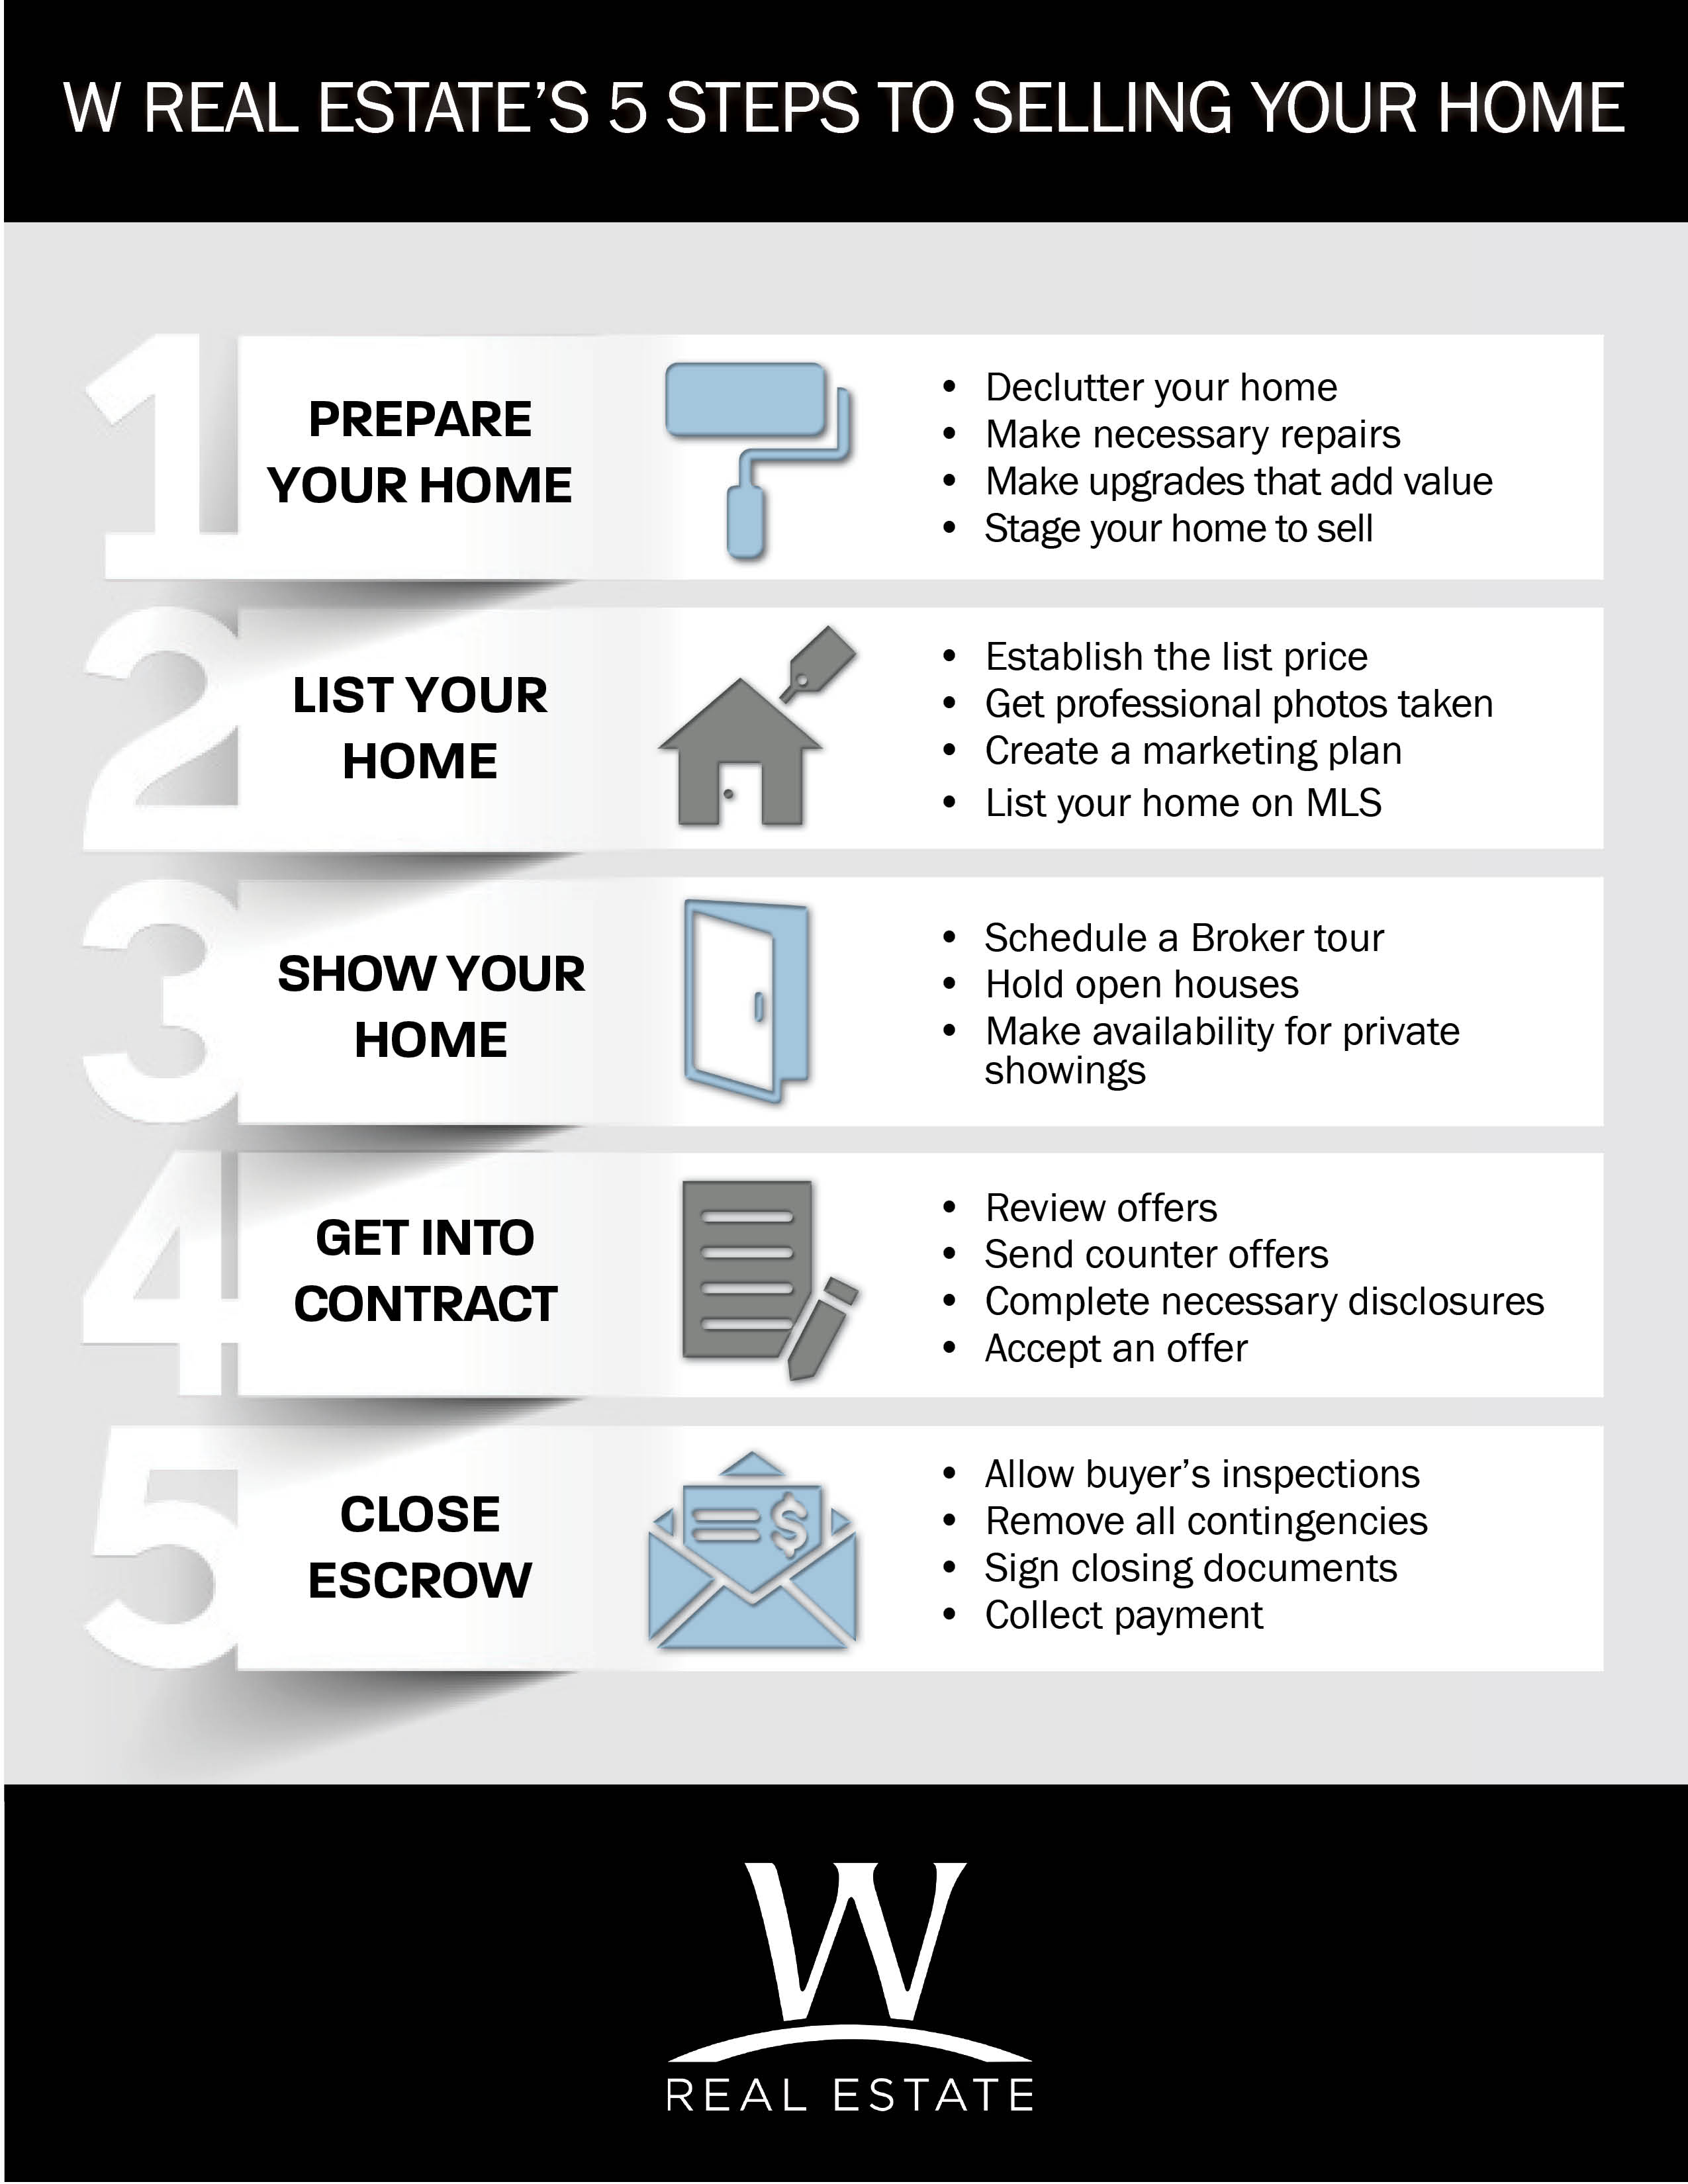 Image of W Real Estate's Five Steps to Selling Your Home